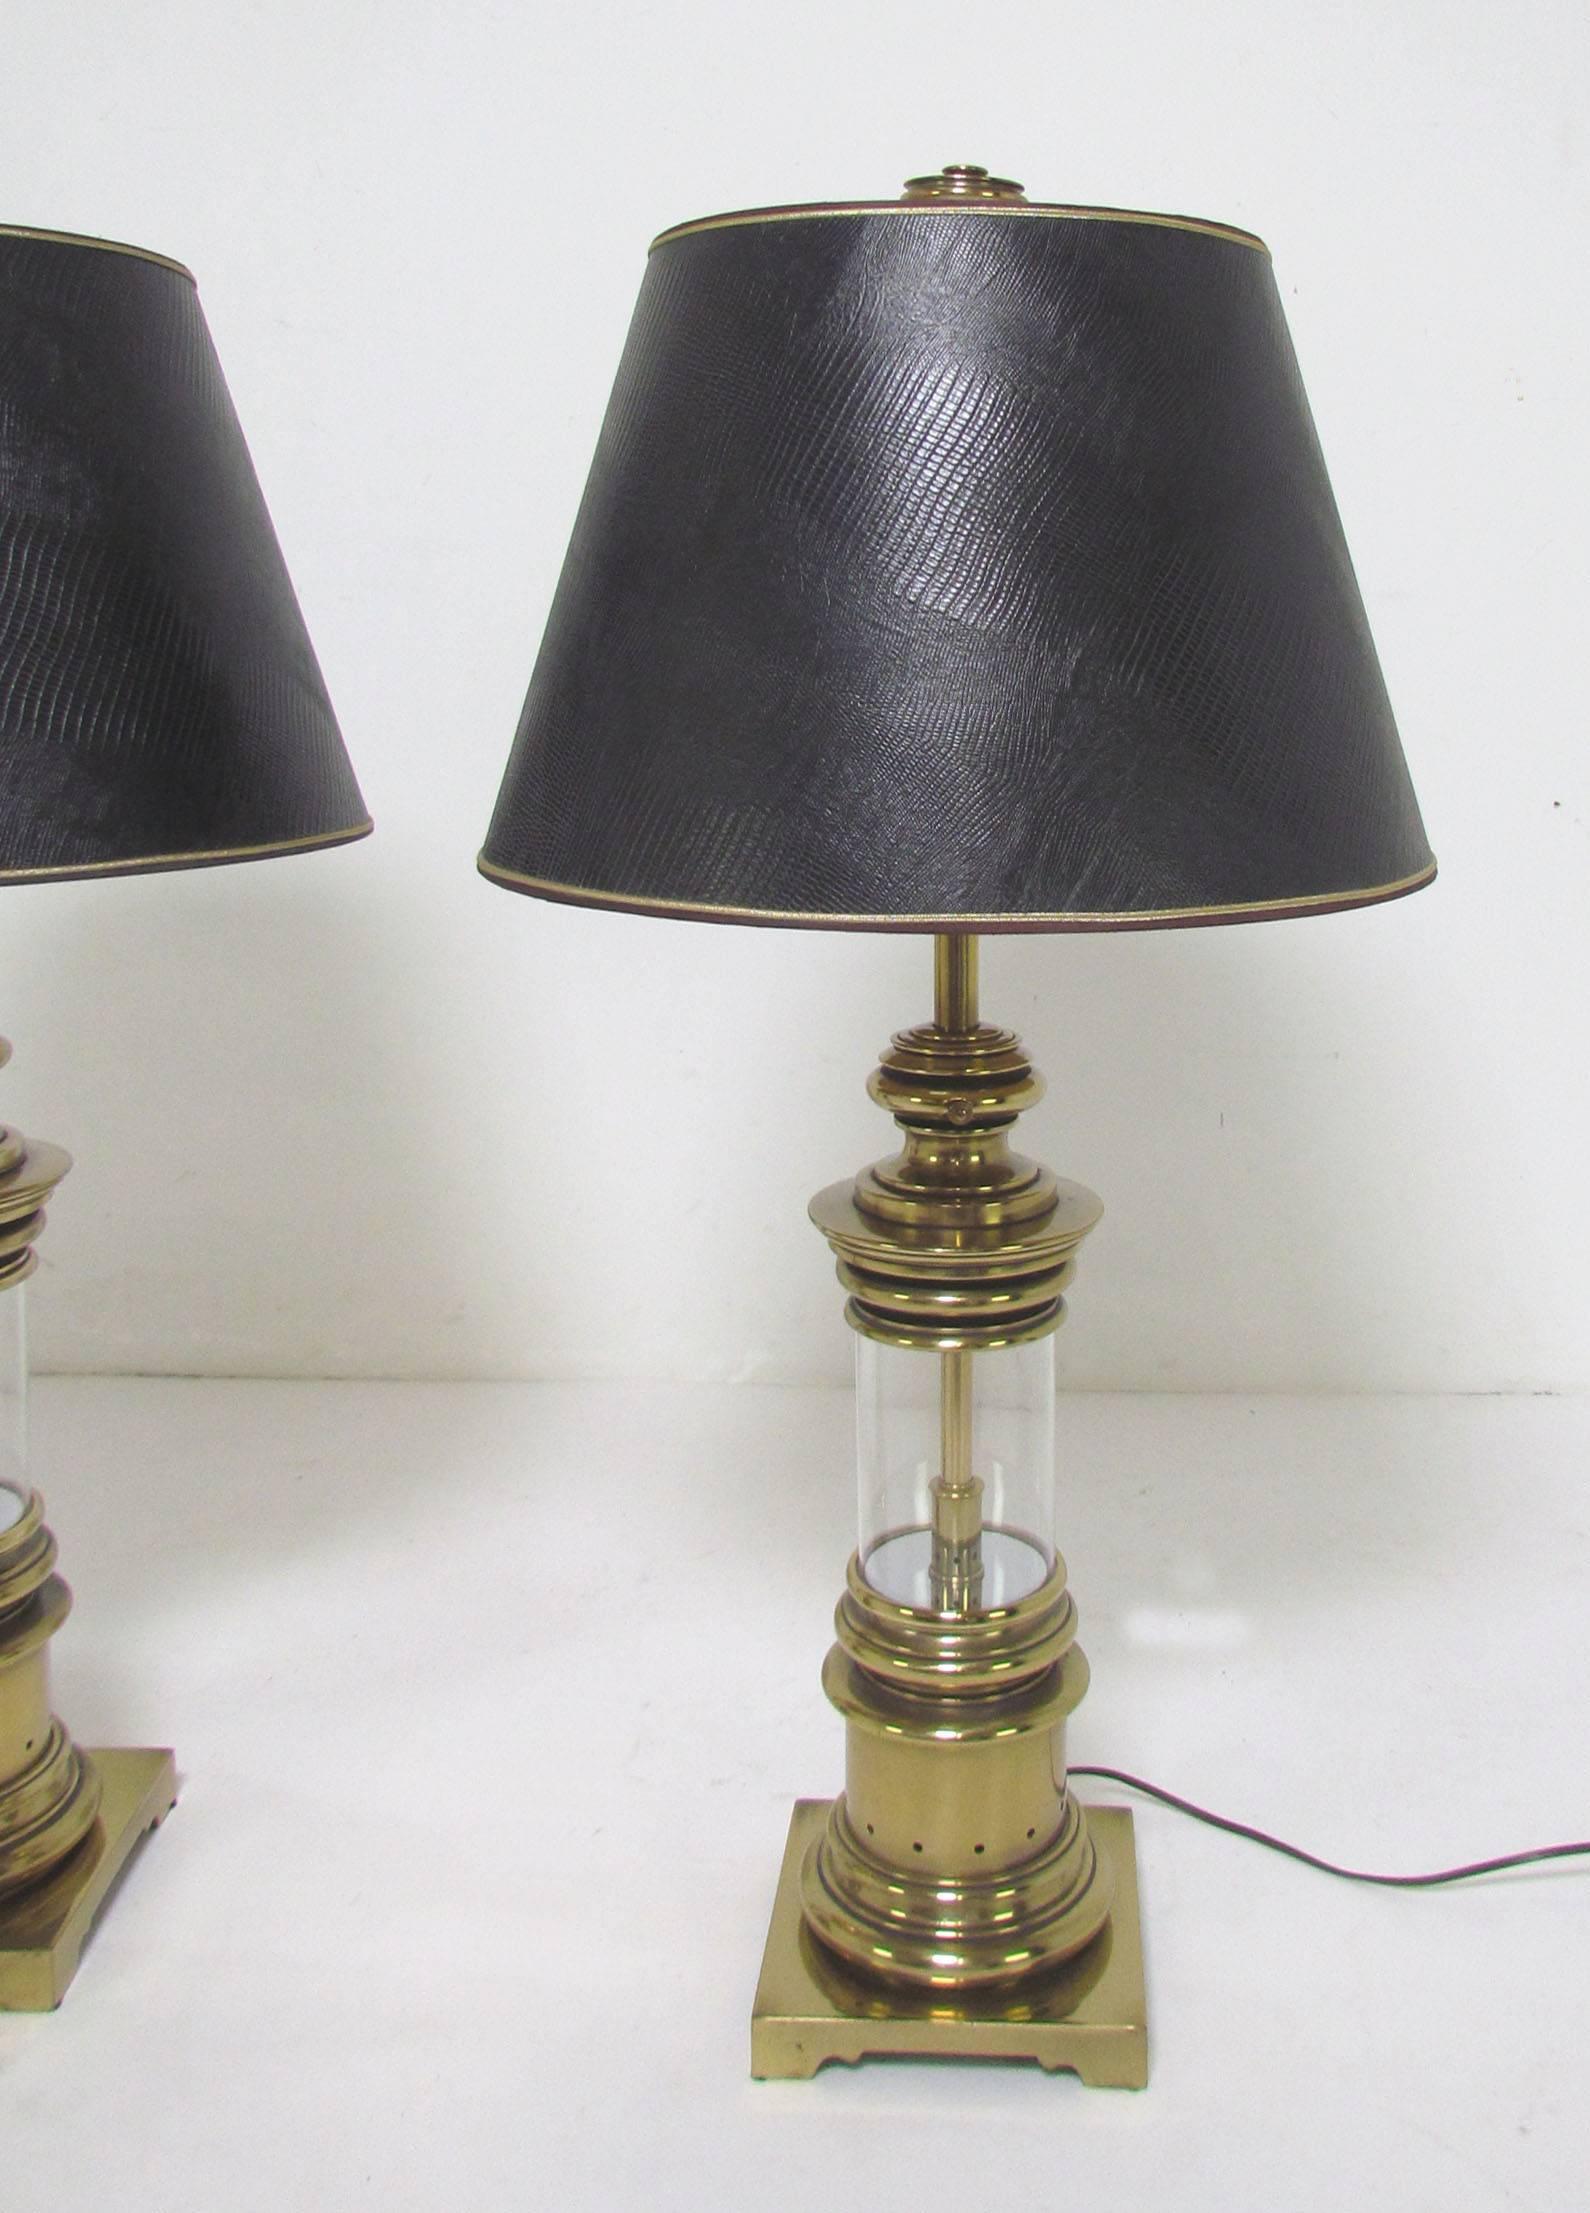 Impressive pair of brass table lamps by Stiffel, with original finials and shades, circa 1960s.

36" high to top of finials, bases are 7.5" square.
Shades measure 11.5" high, 18" in diameter.